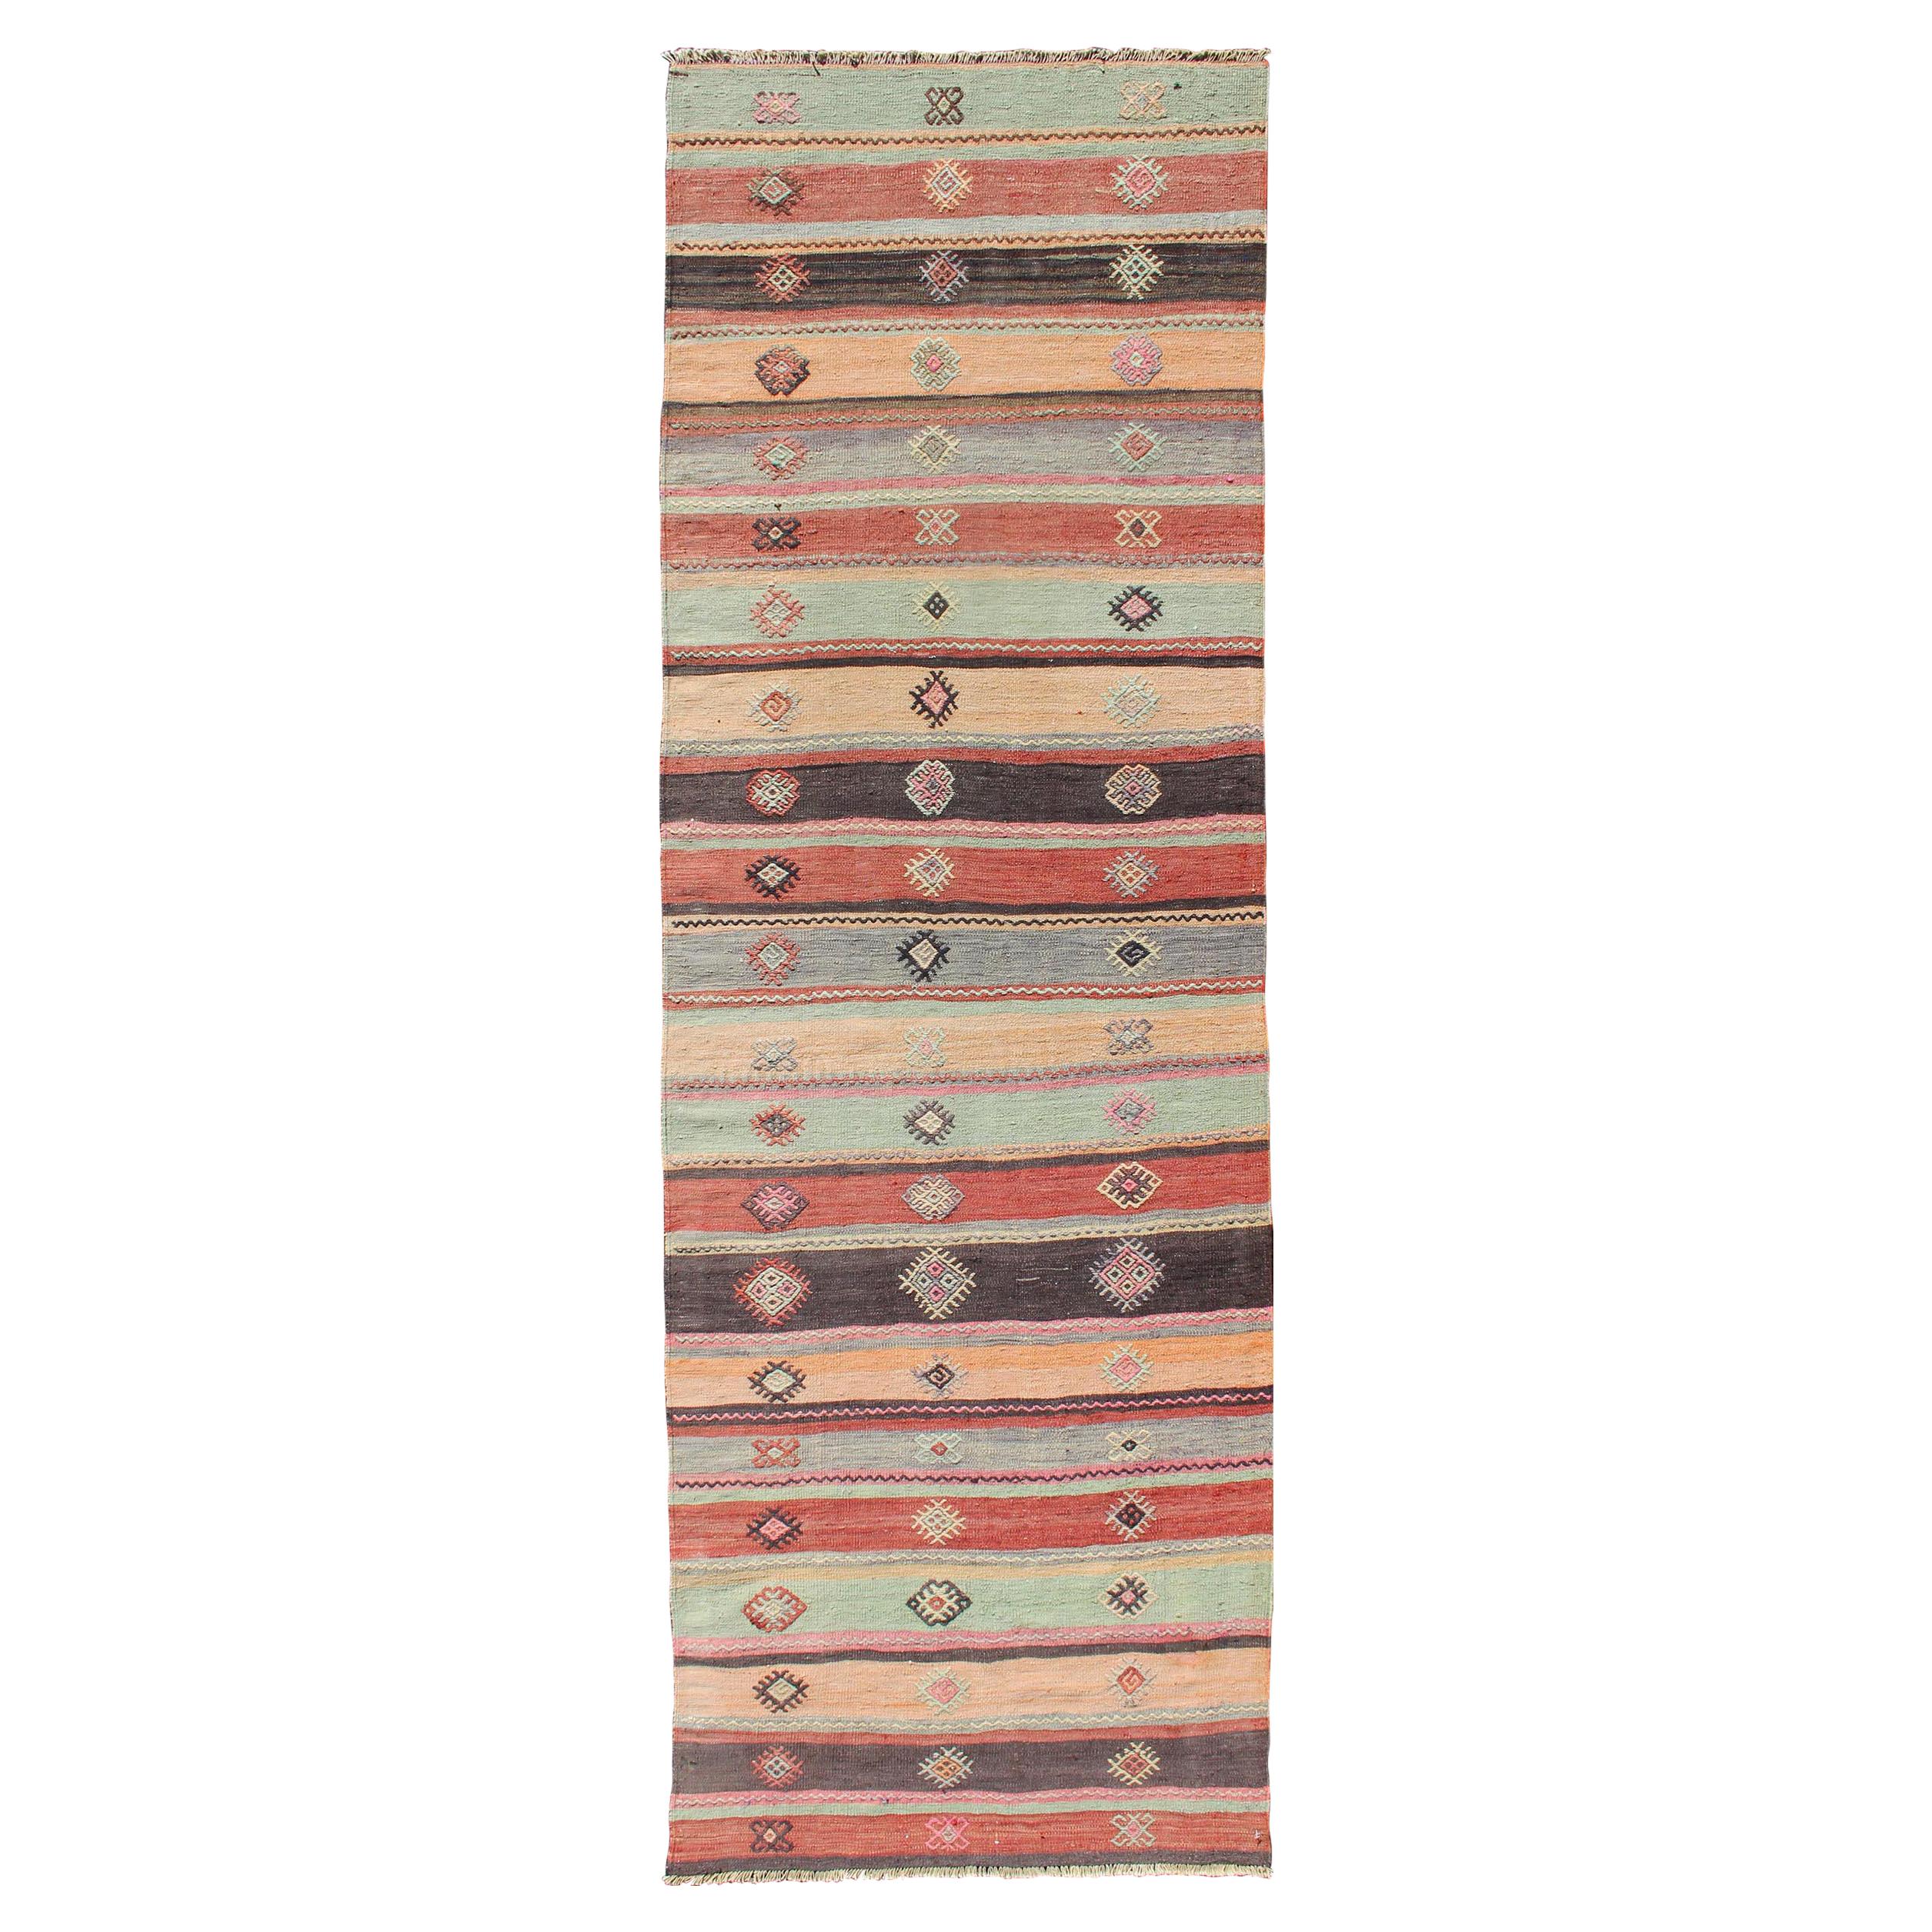 Colorful Vintage Embroidered Kilim Runner with Stripe's and Geometric Prints